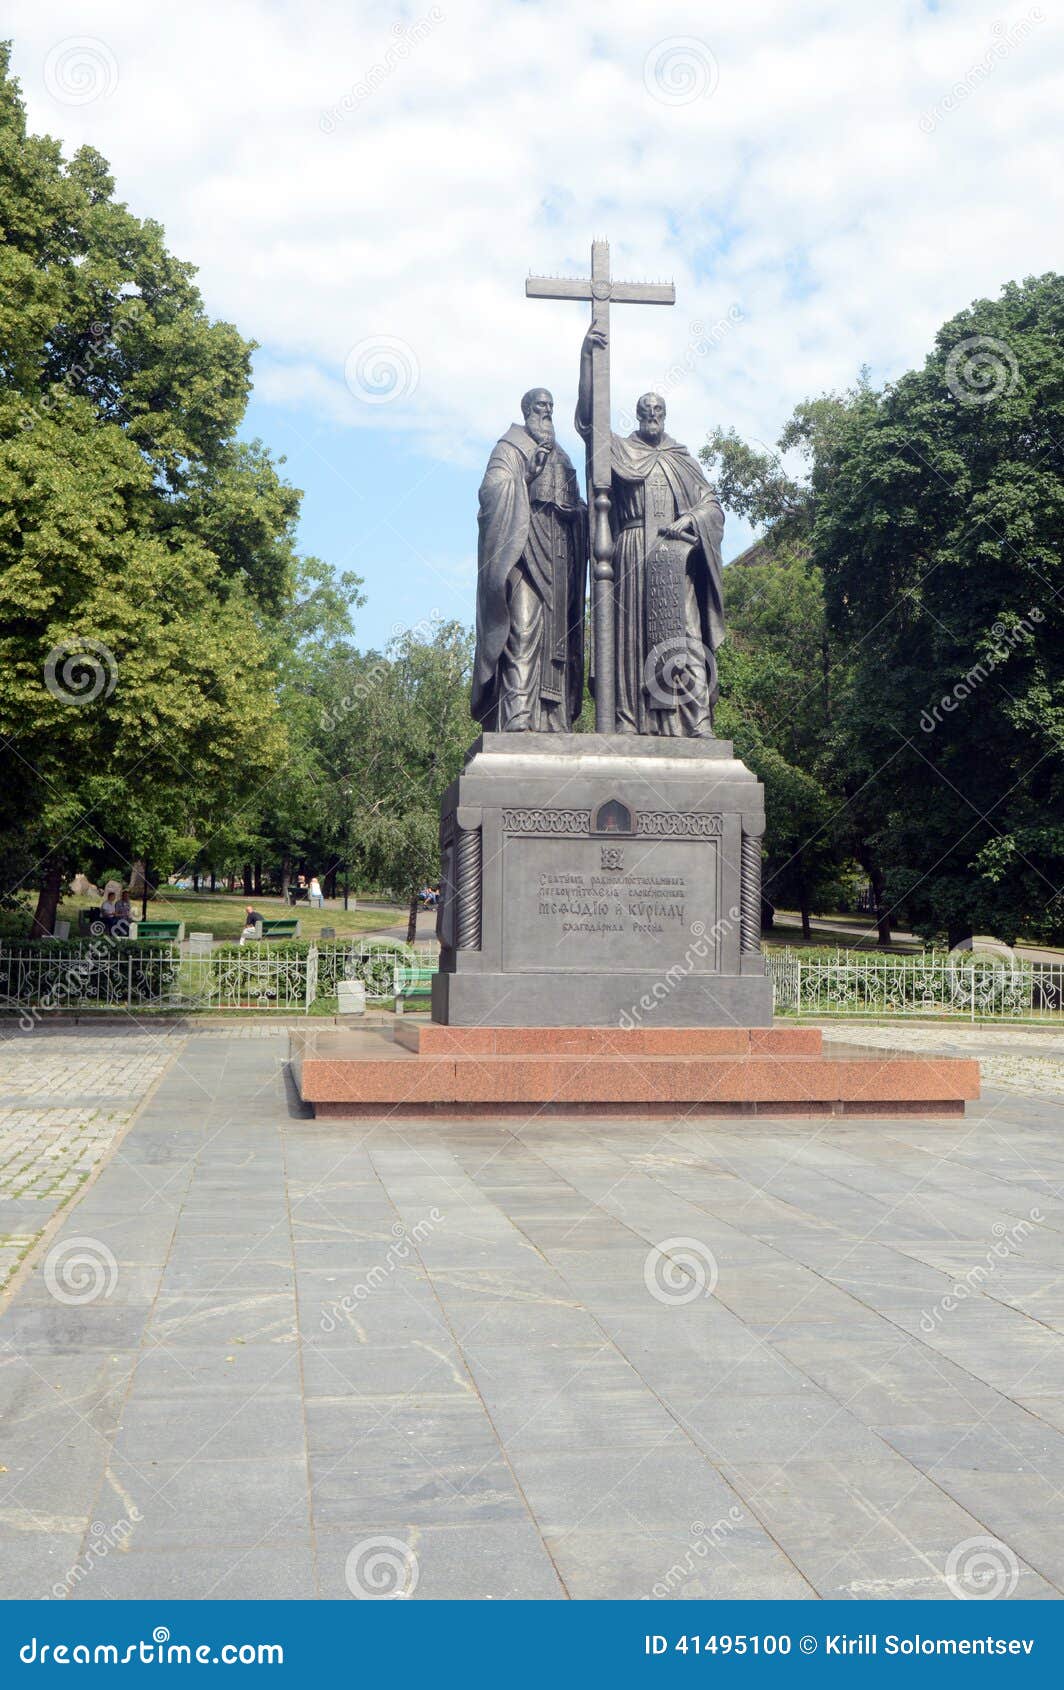 the monument to cyril and methodius